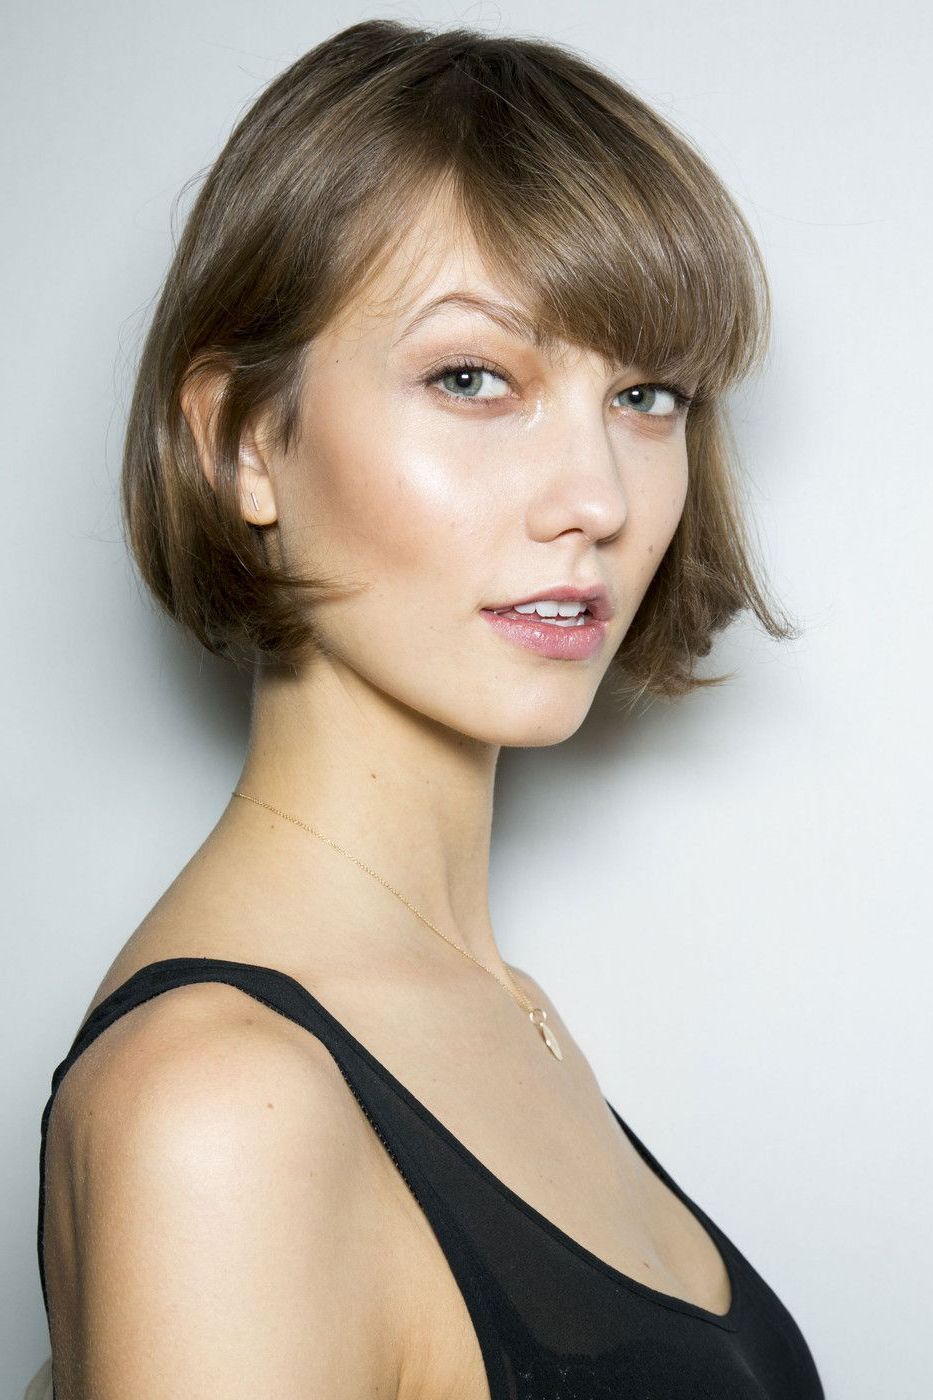 Karlie Kloss At Burberry Fall 2013. Hair. | Hair In 2018 | Pinterest With Regard To Karlie Kloss Short Haircuts (Photo 1 of 25)